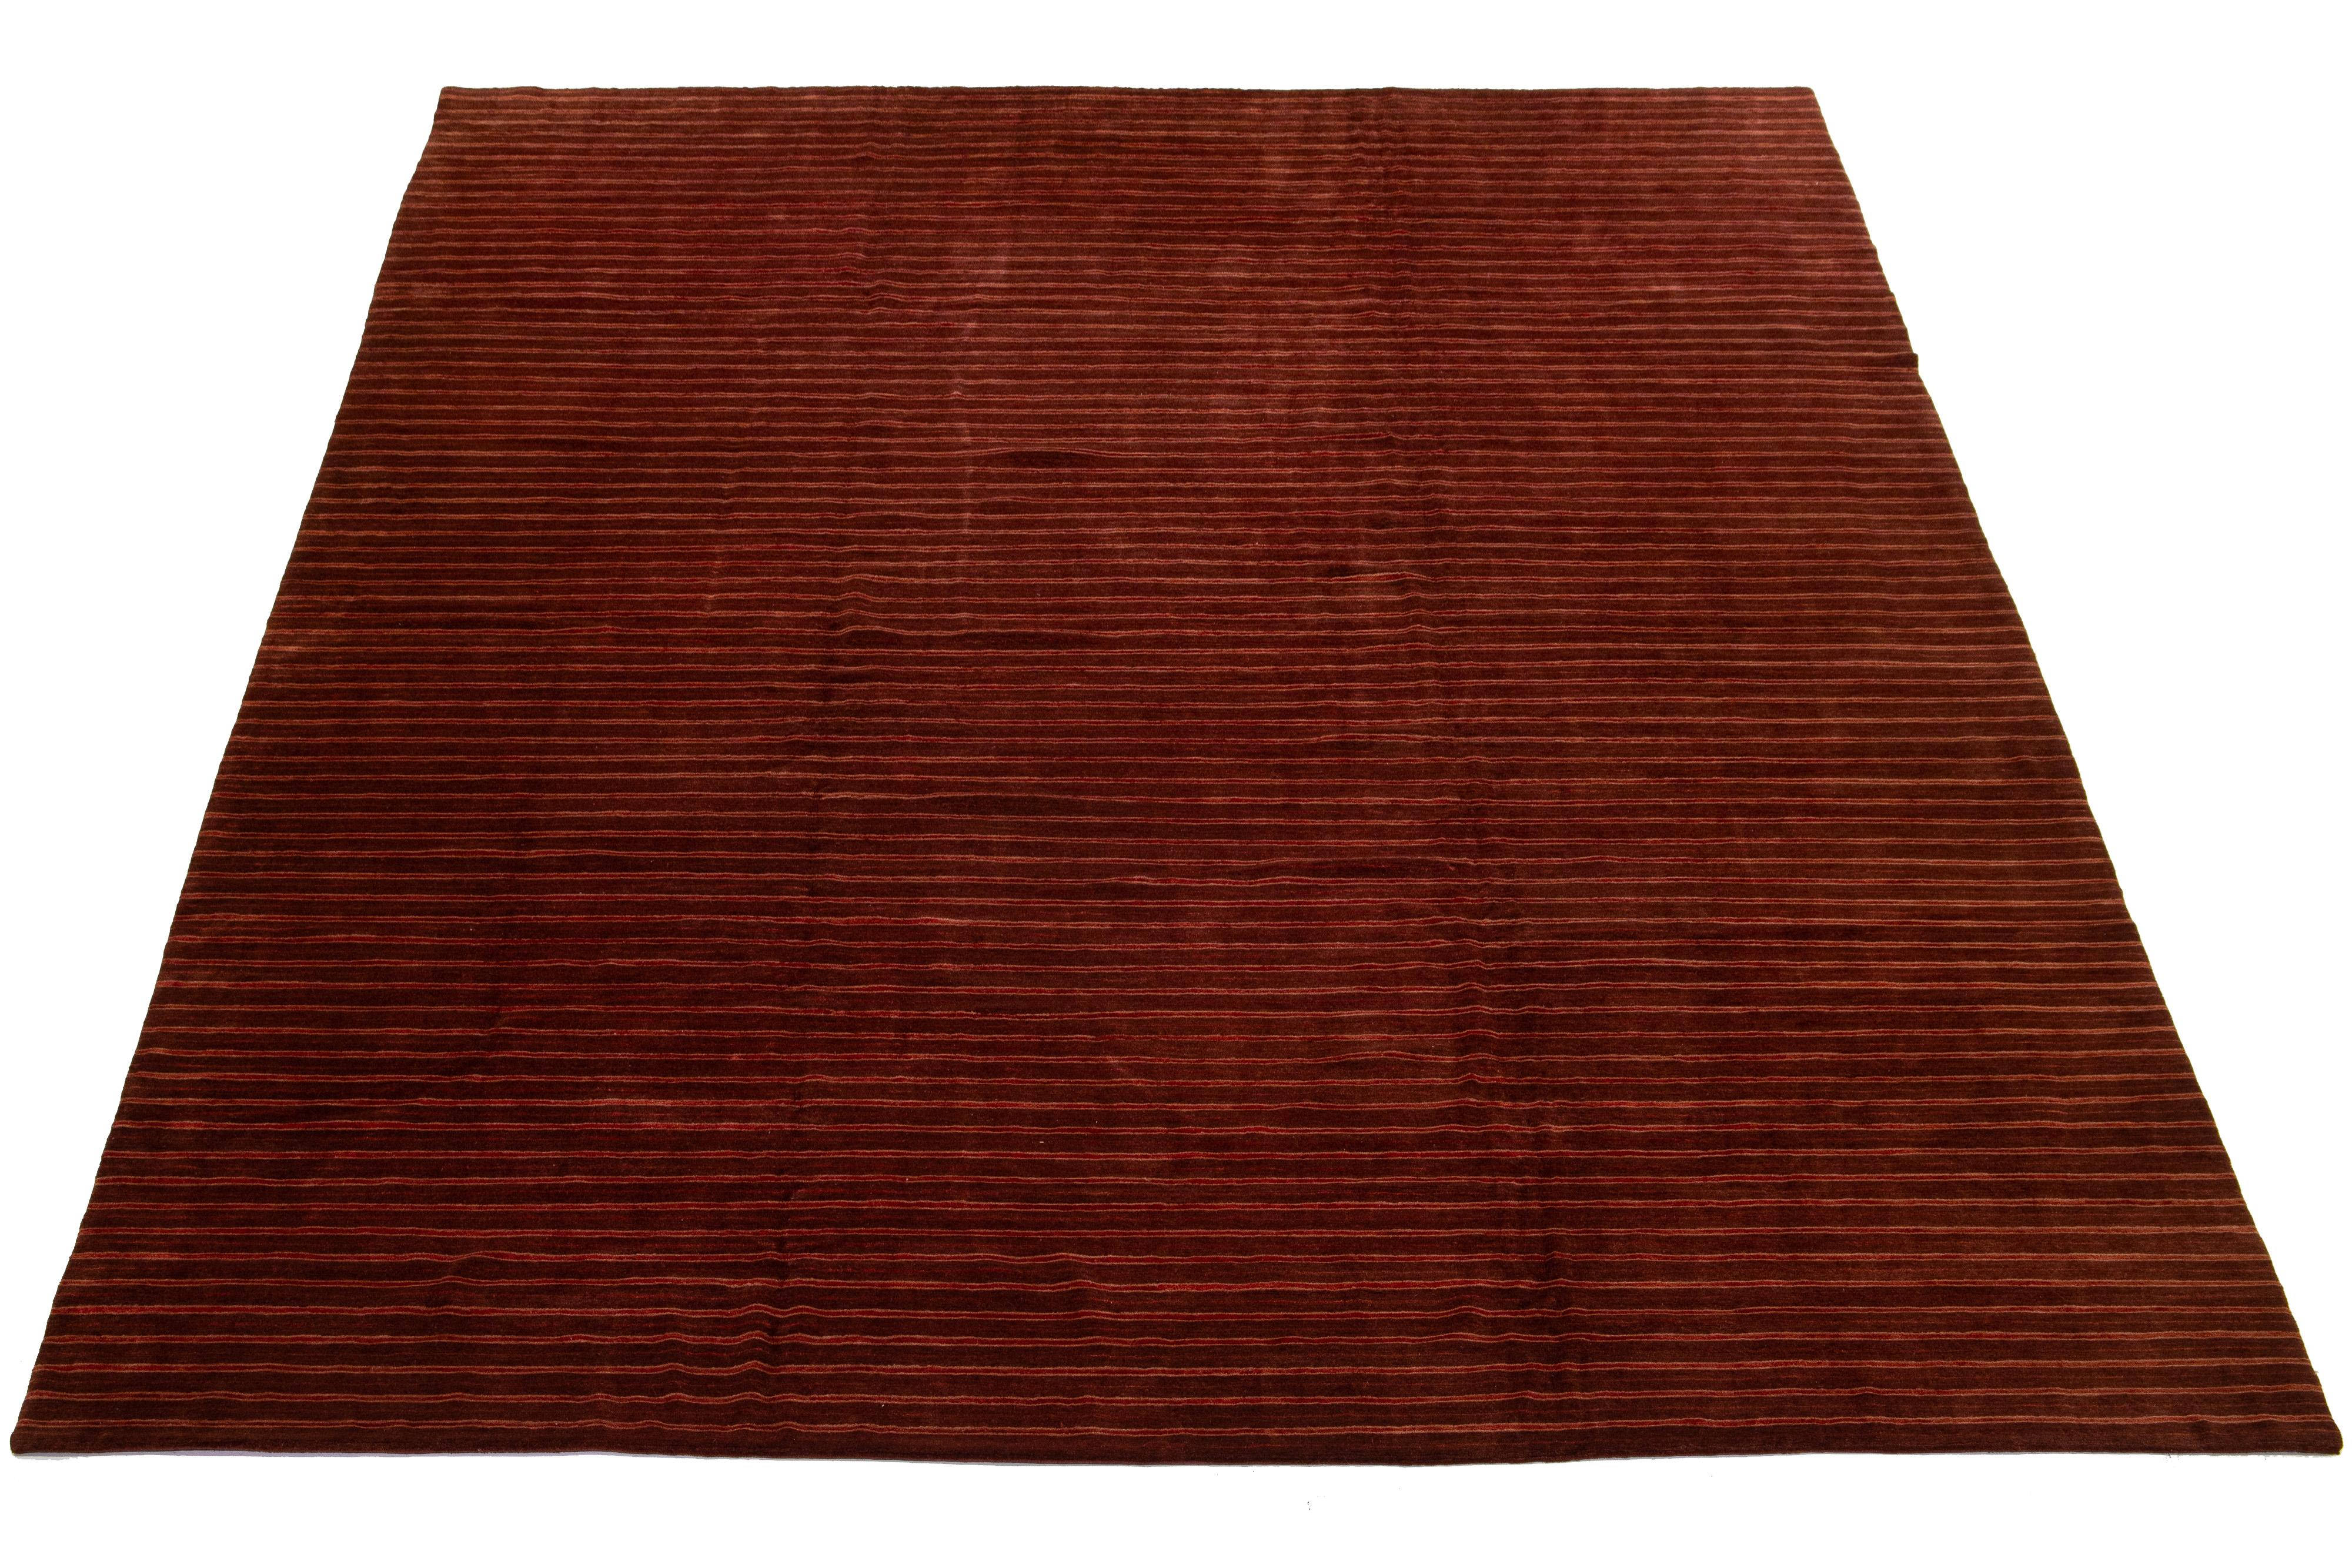 This modern Tibetan rug features a burgundy background with rust accents, creating a chic and sophisticated overall striped design that reflects the essence of modernism in the 21st century.

This rug measures 13'3